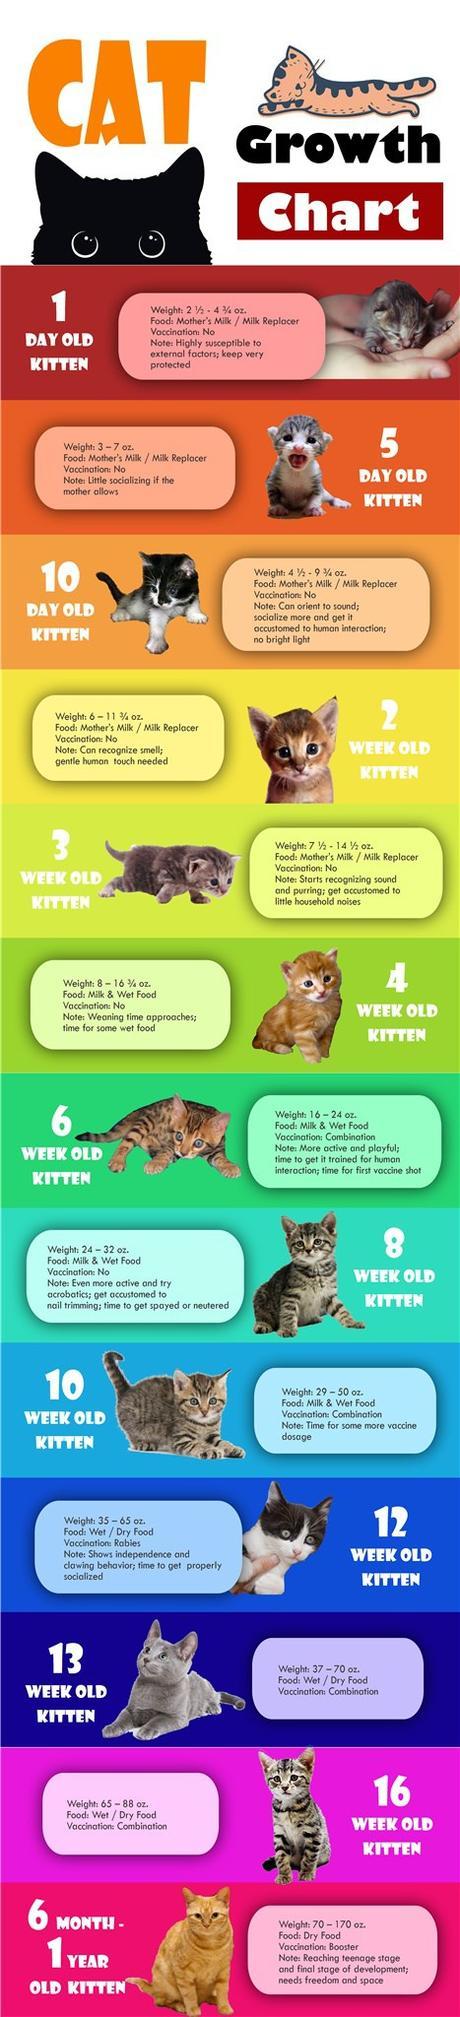 [Infographic] Kitten Cat Growth Chart by Age, Weight and Food